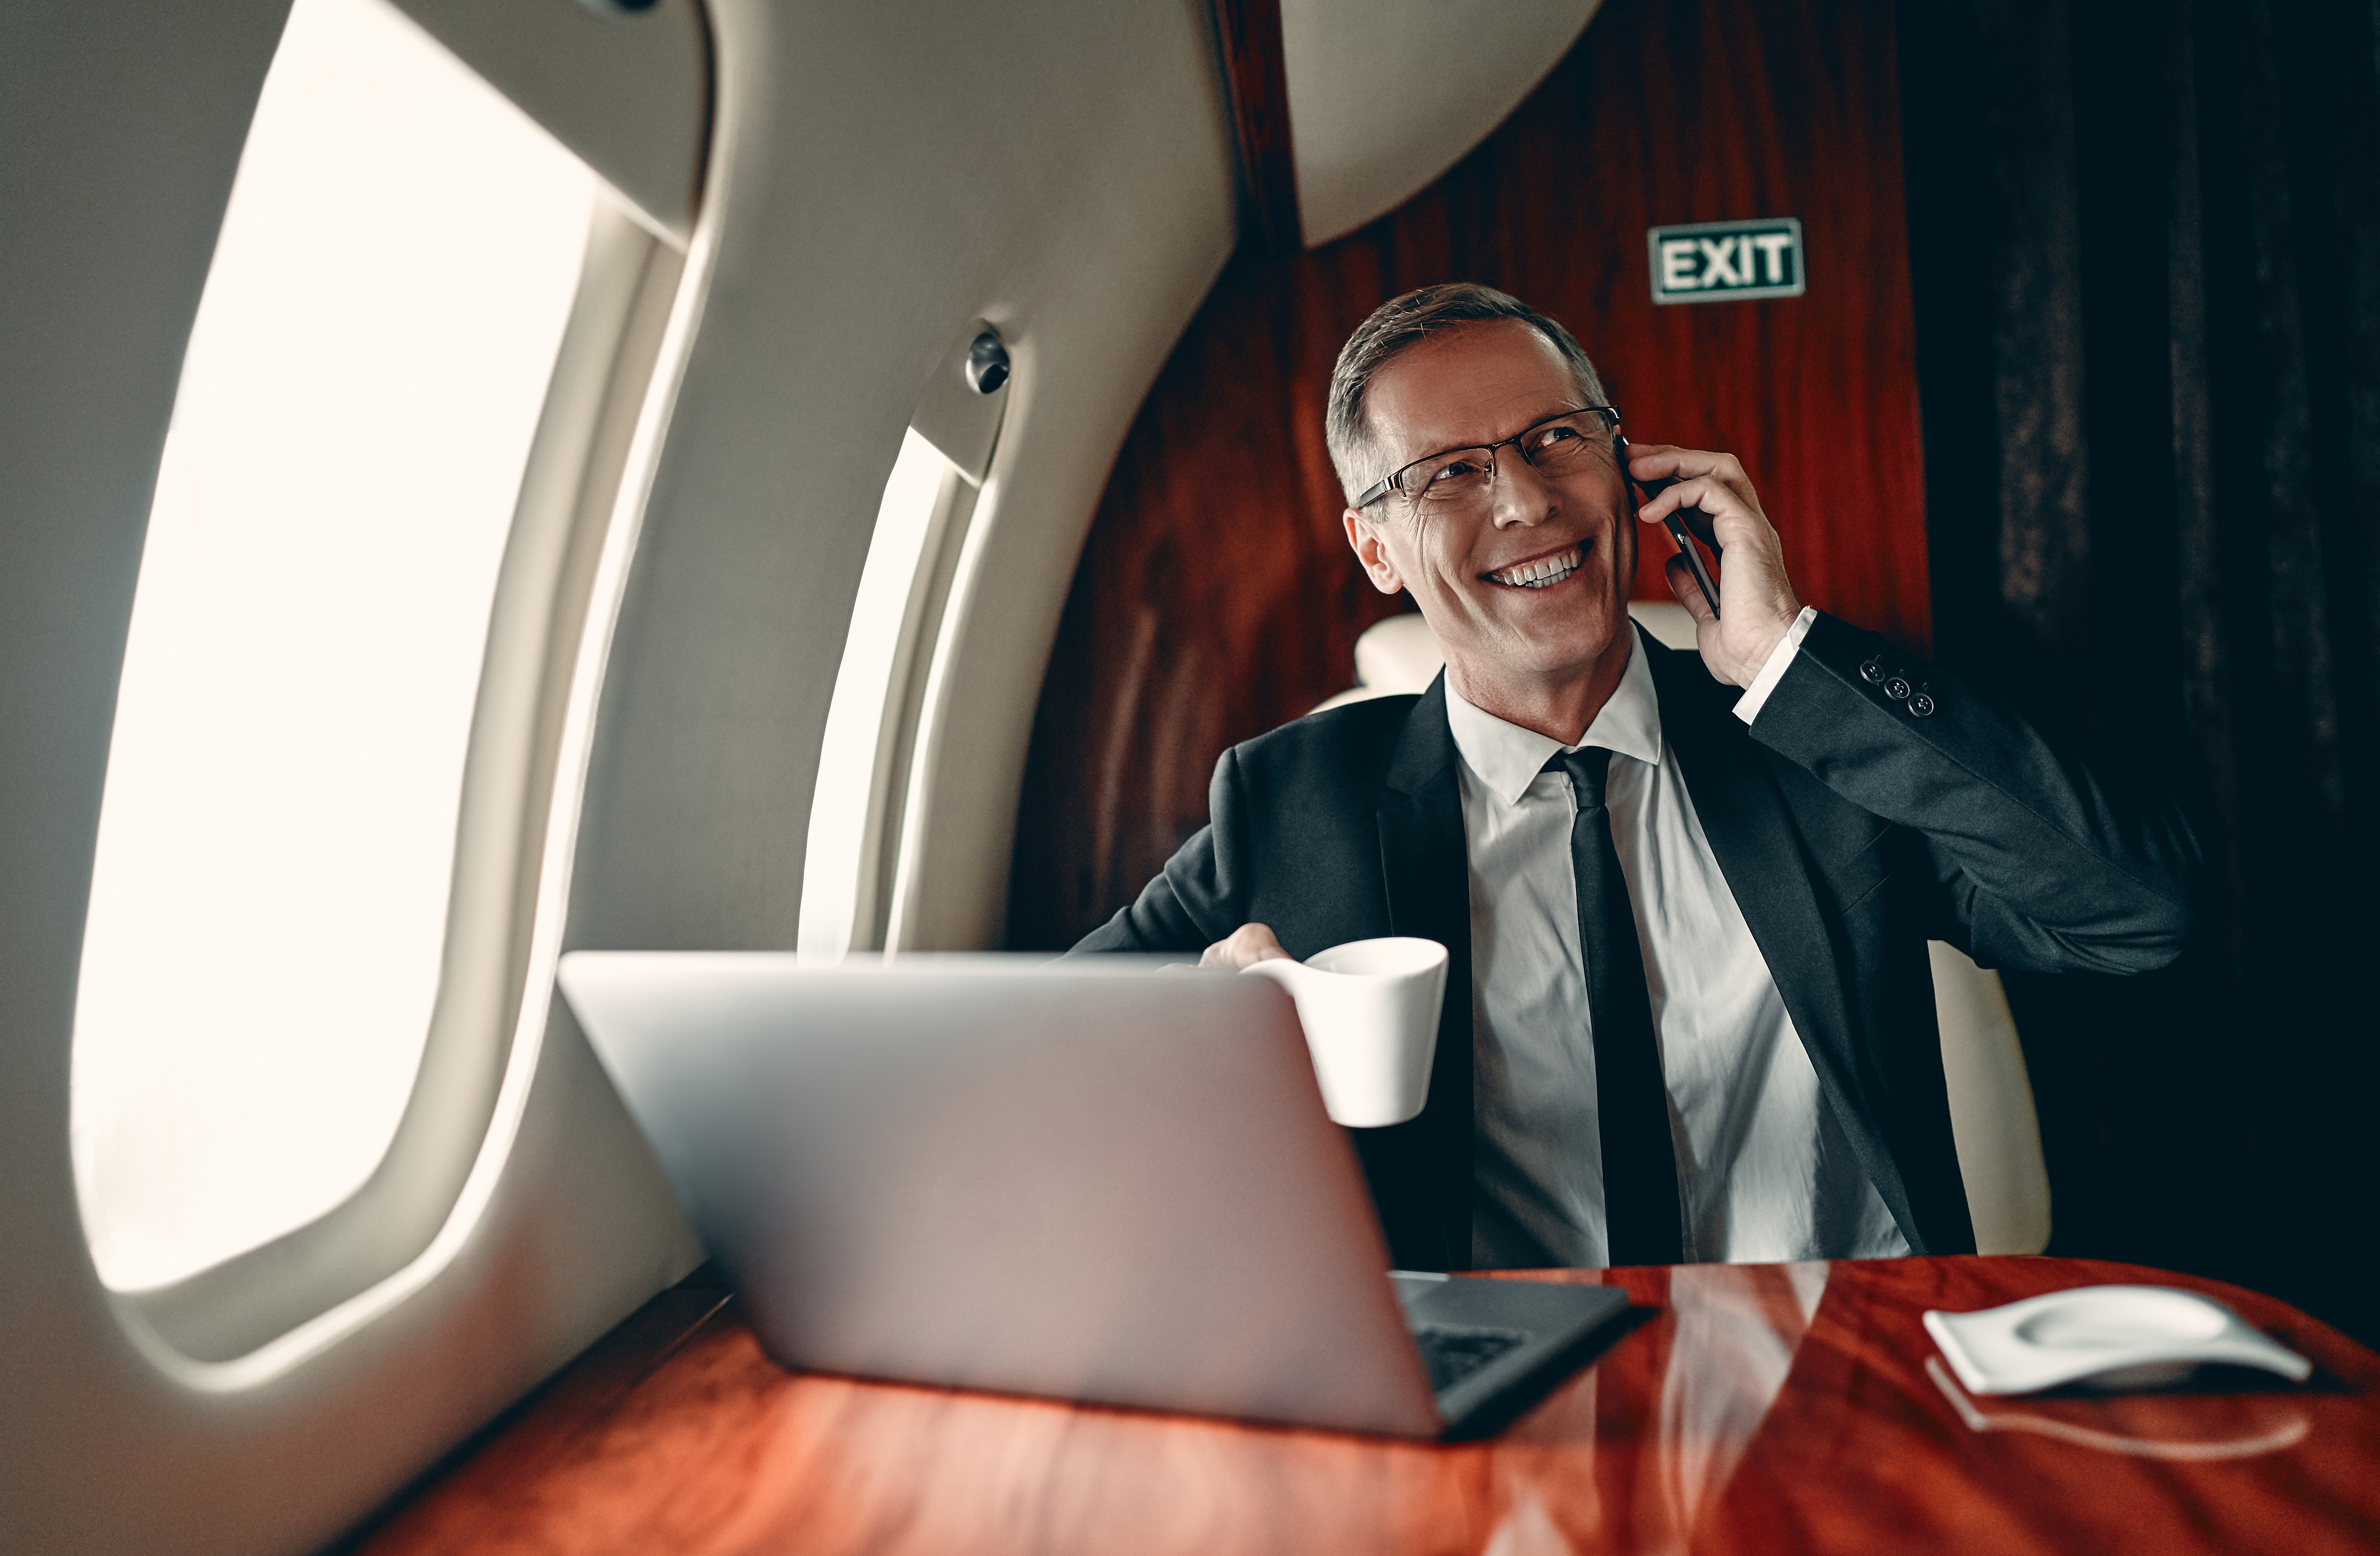 Senior businessman in suit is working on a laptop and speaking on mobile phone while flying in private jet.